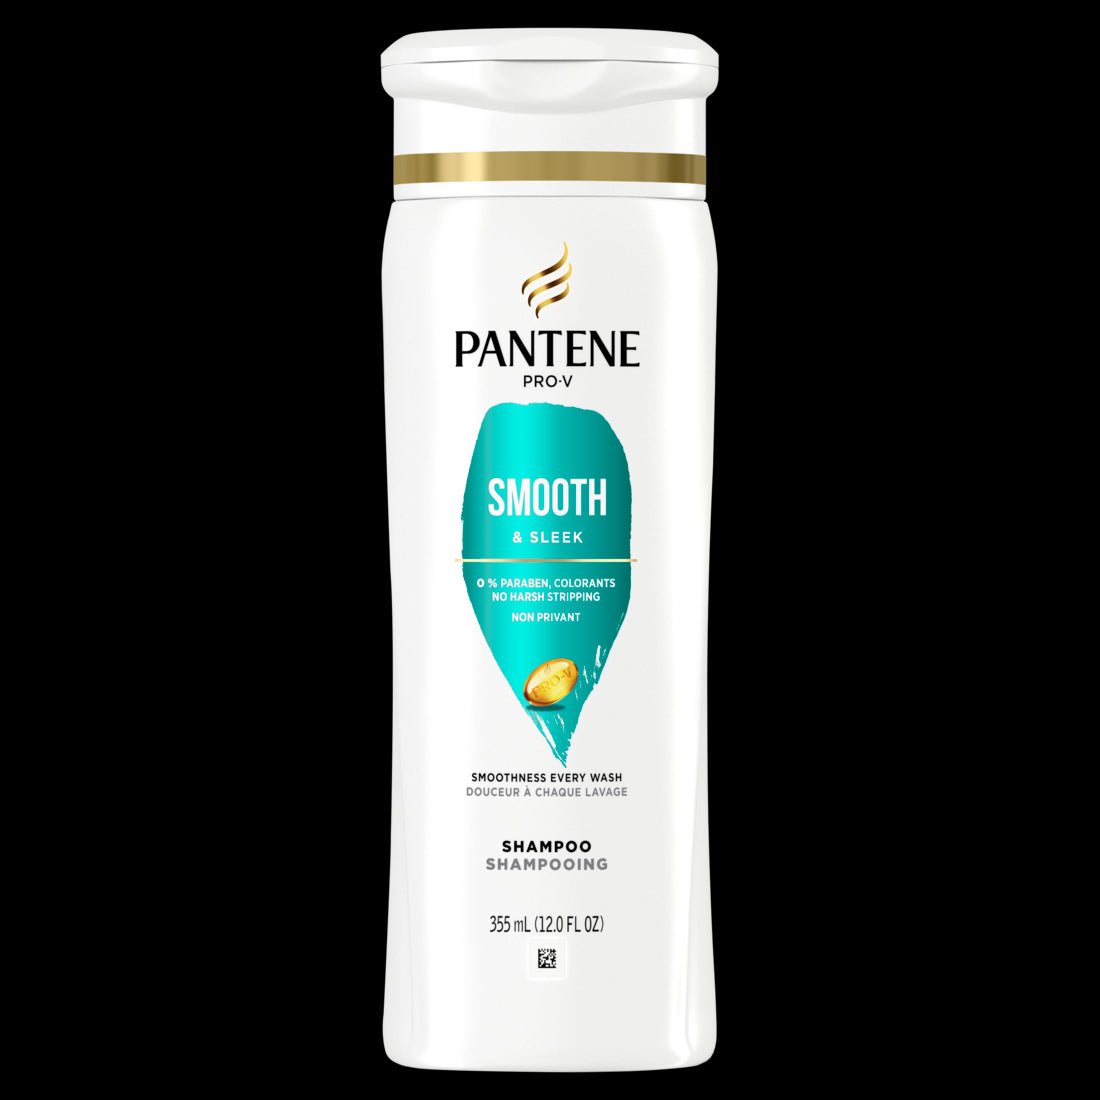 Pantene Shampoo Smooth and Sleek Fights Frizz Safe for Color Treated Hair-12oz/6pk